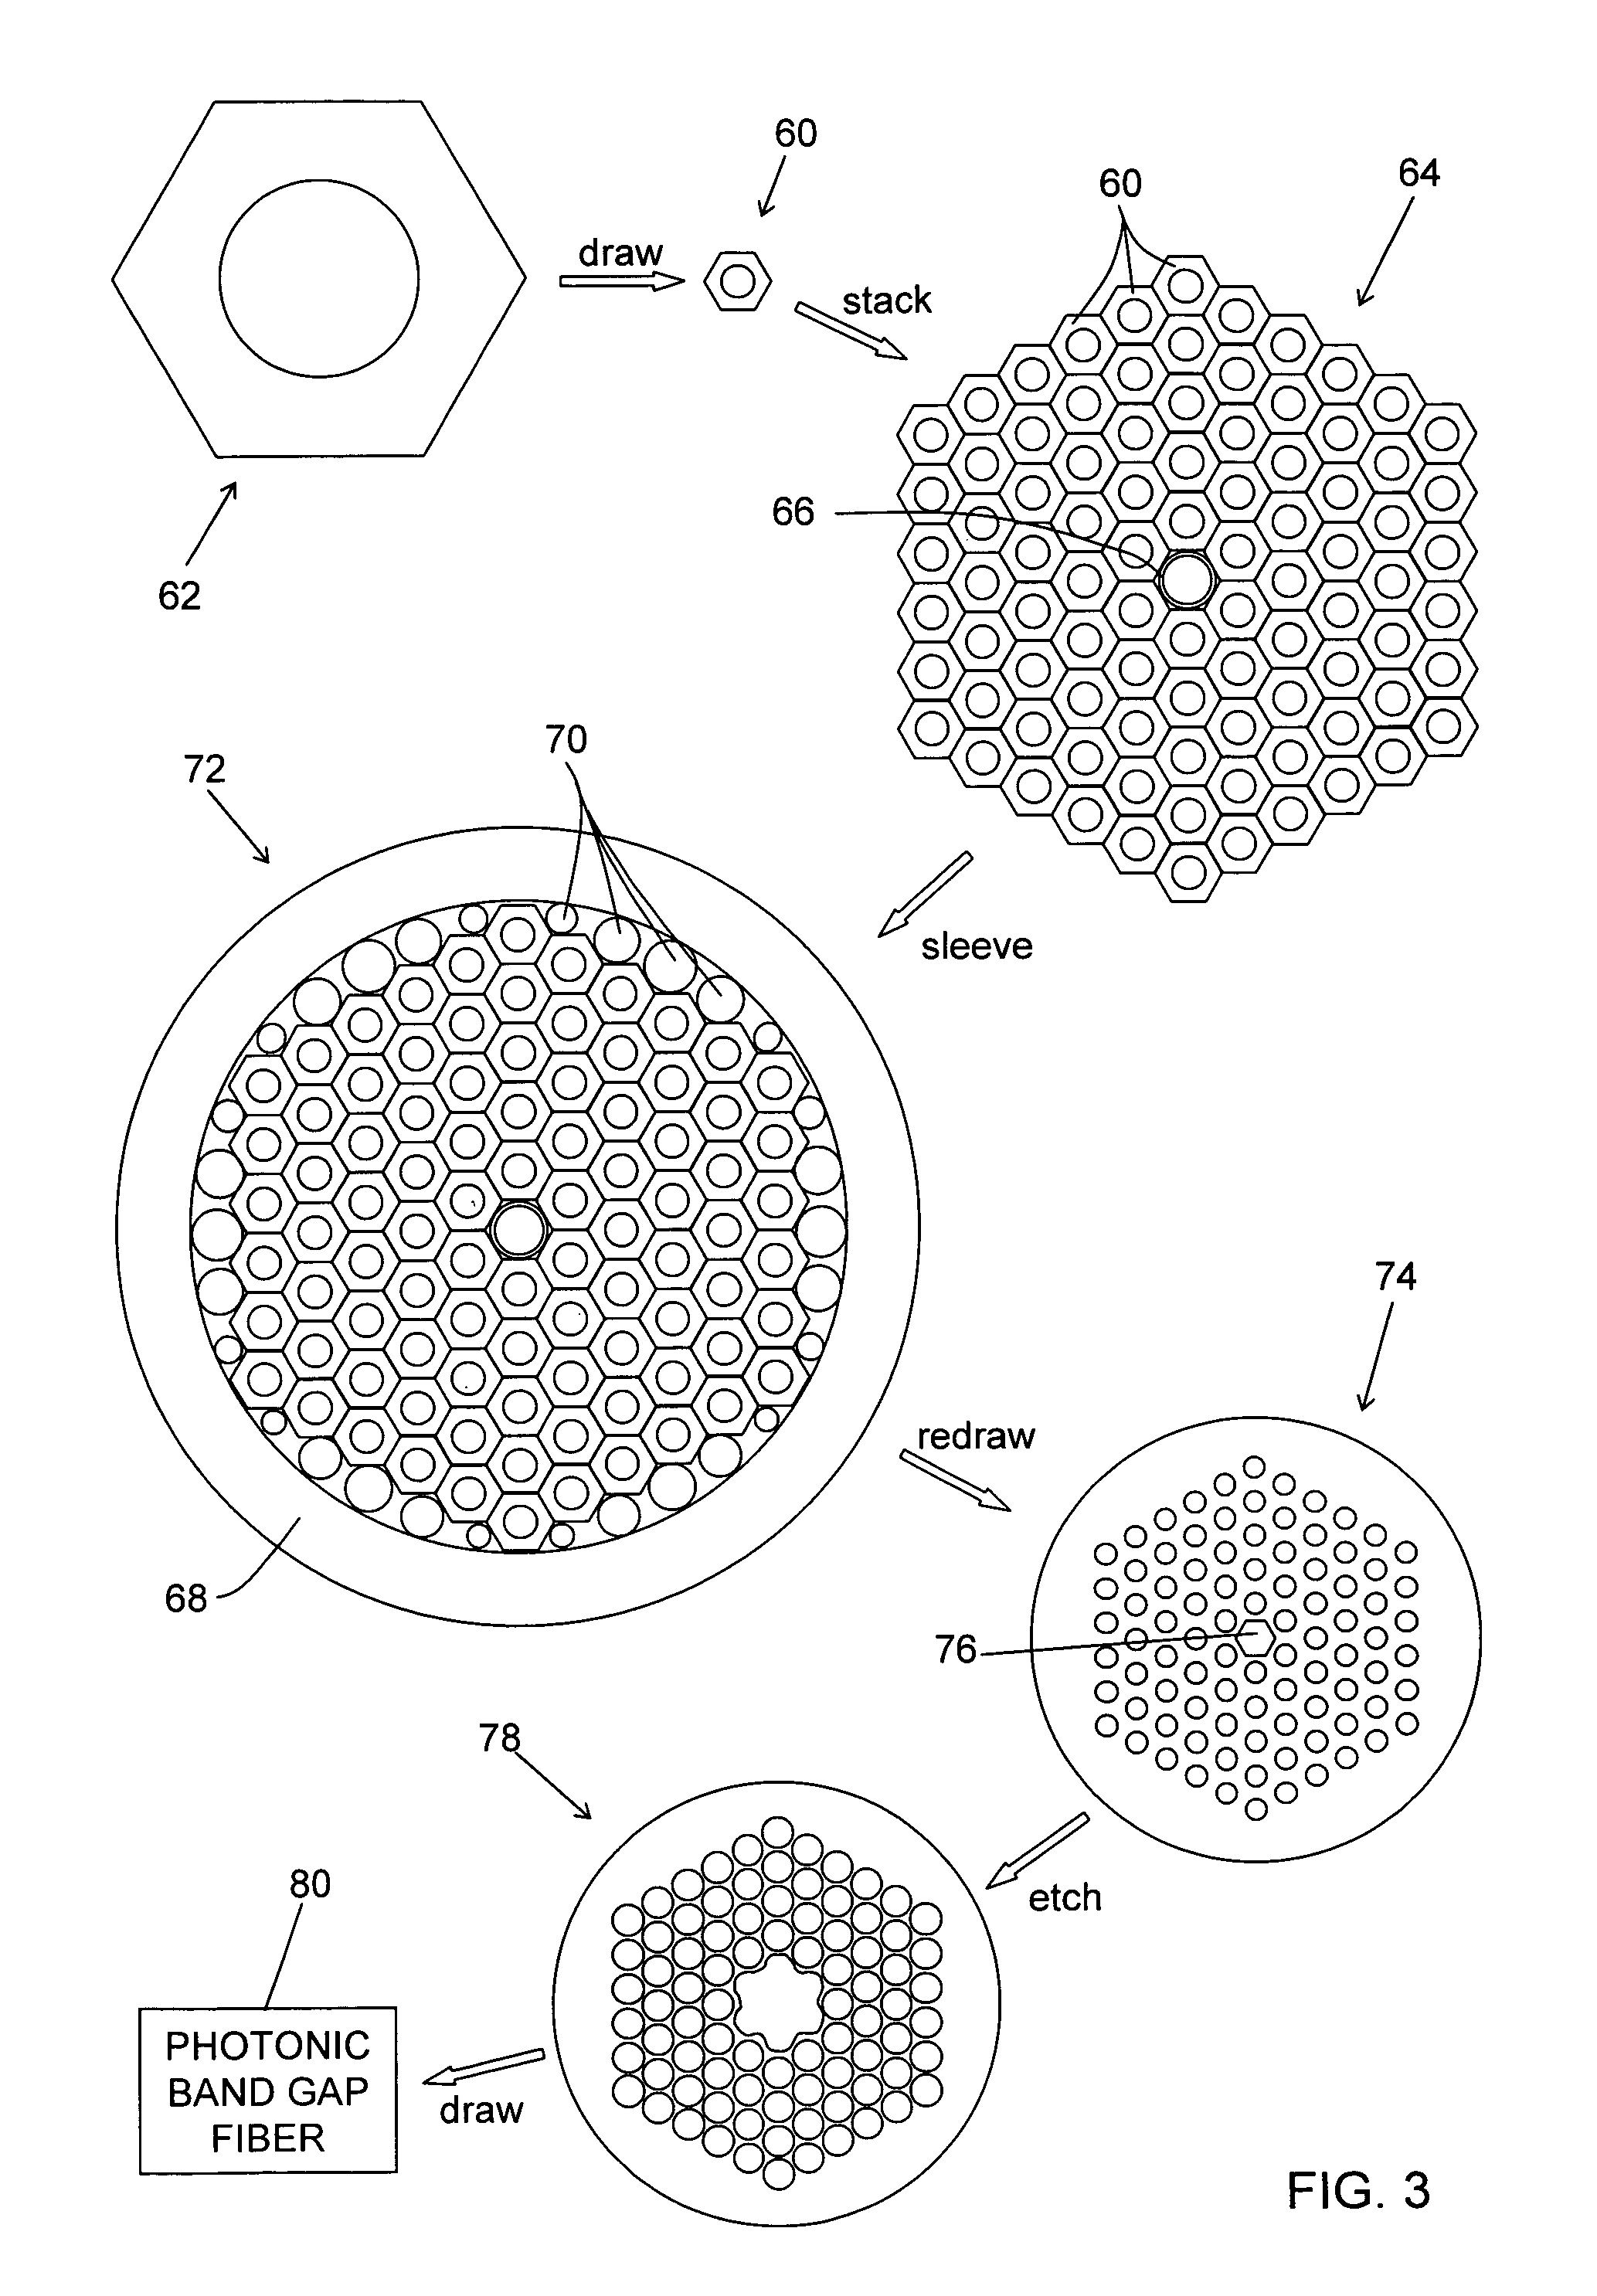 Methods of generating and transporting short wavelength radiation and apparati used therein